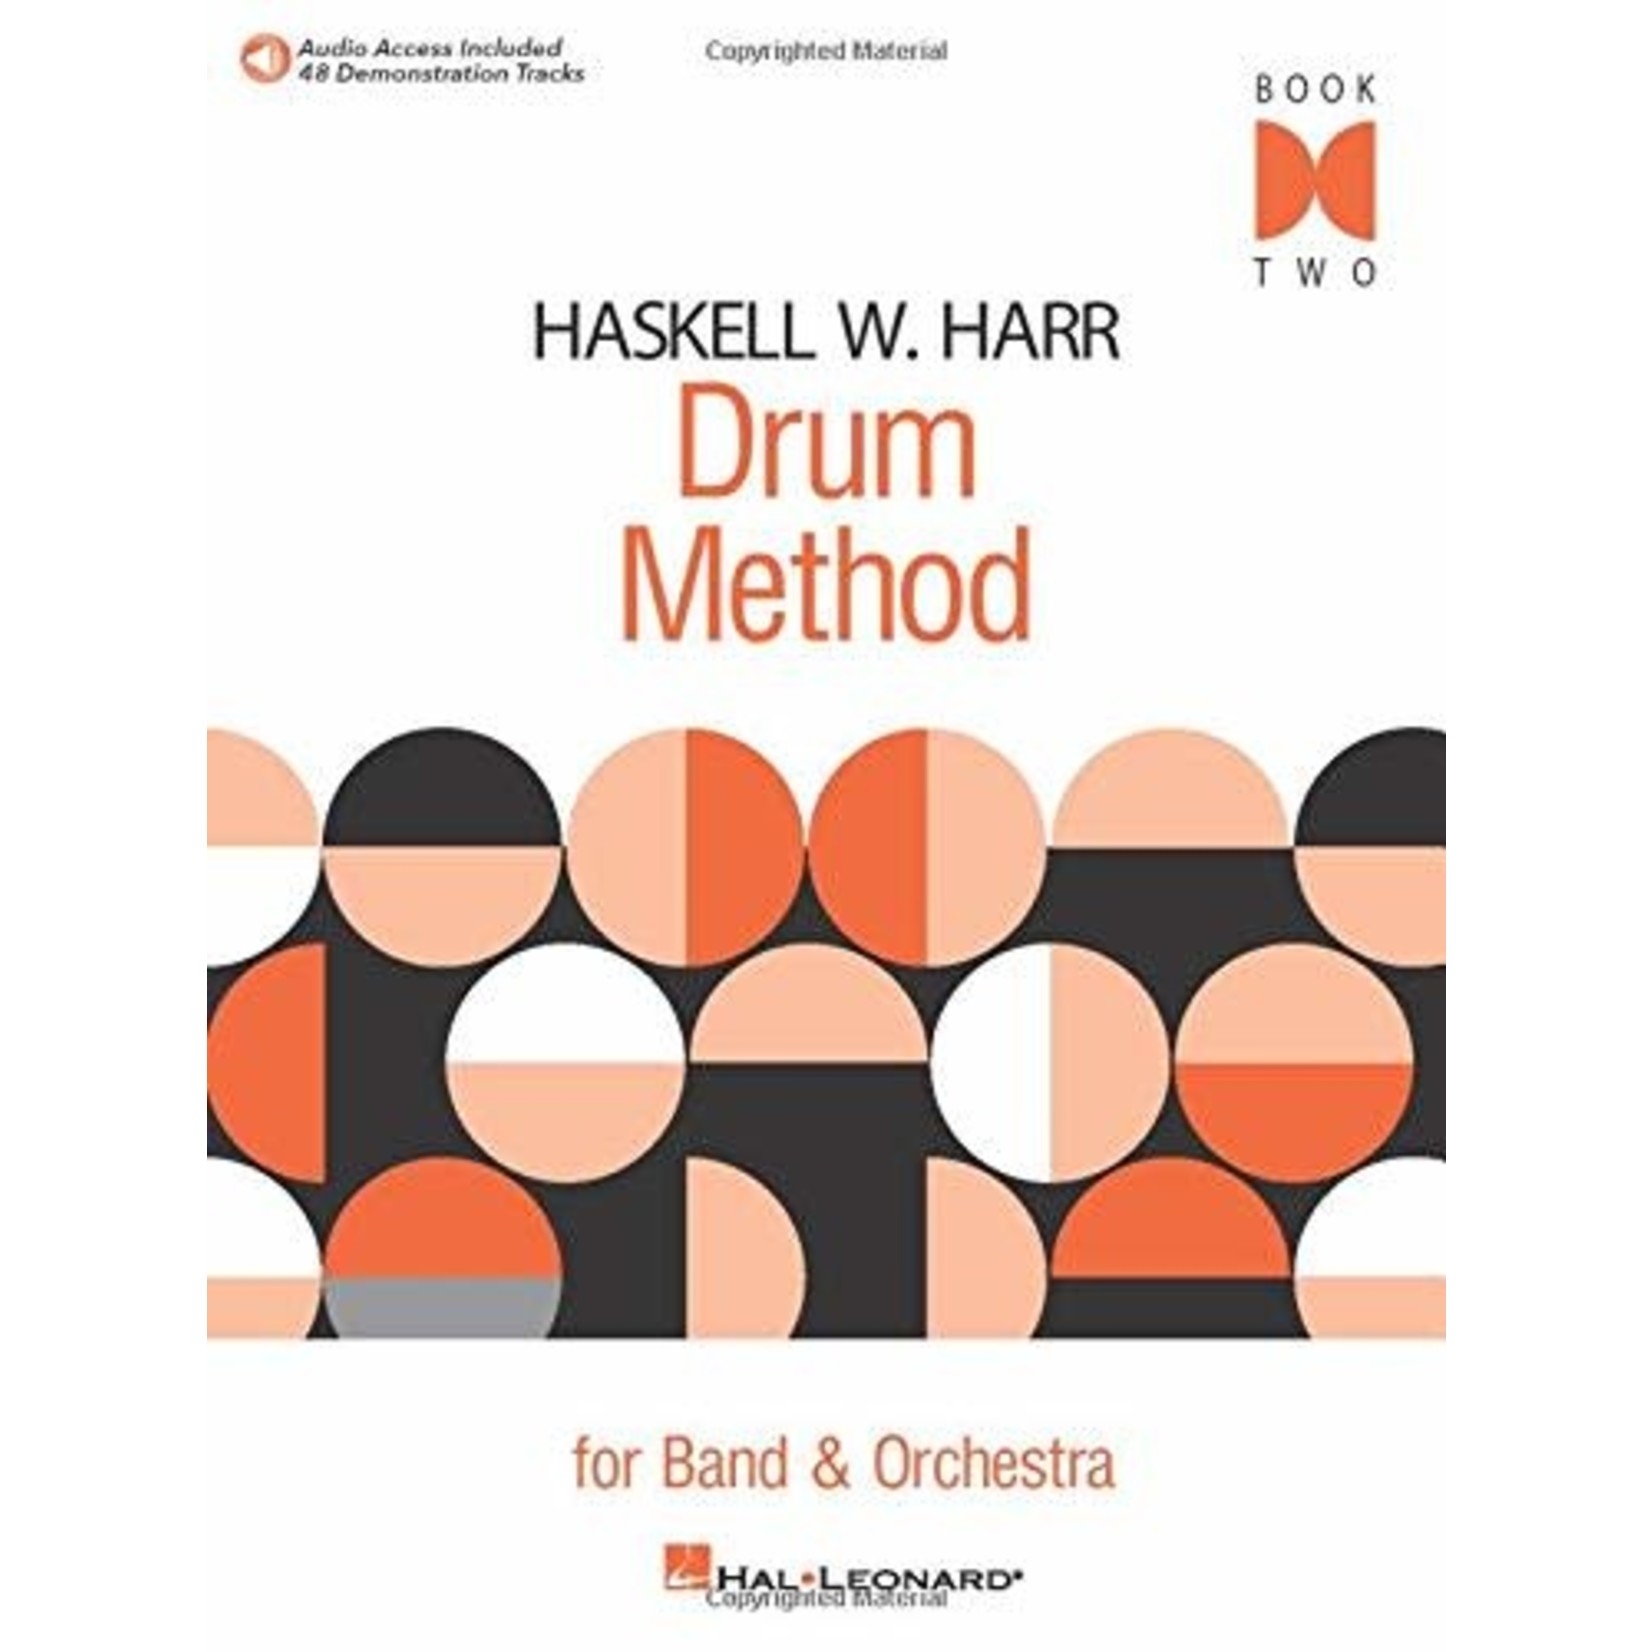 Haskell W. Harr Drum Method For Band and Orchestra  Book Two